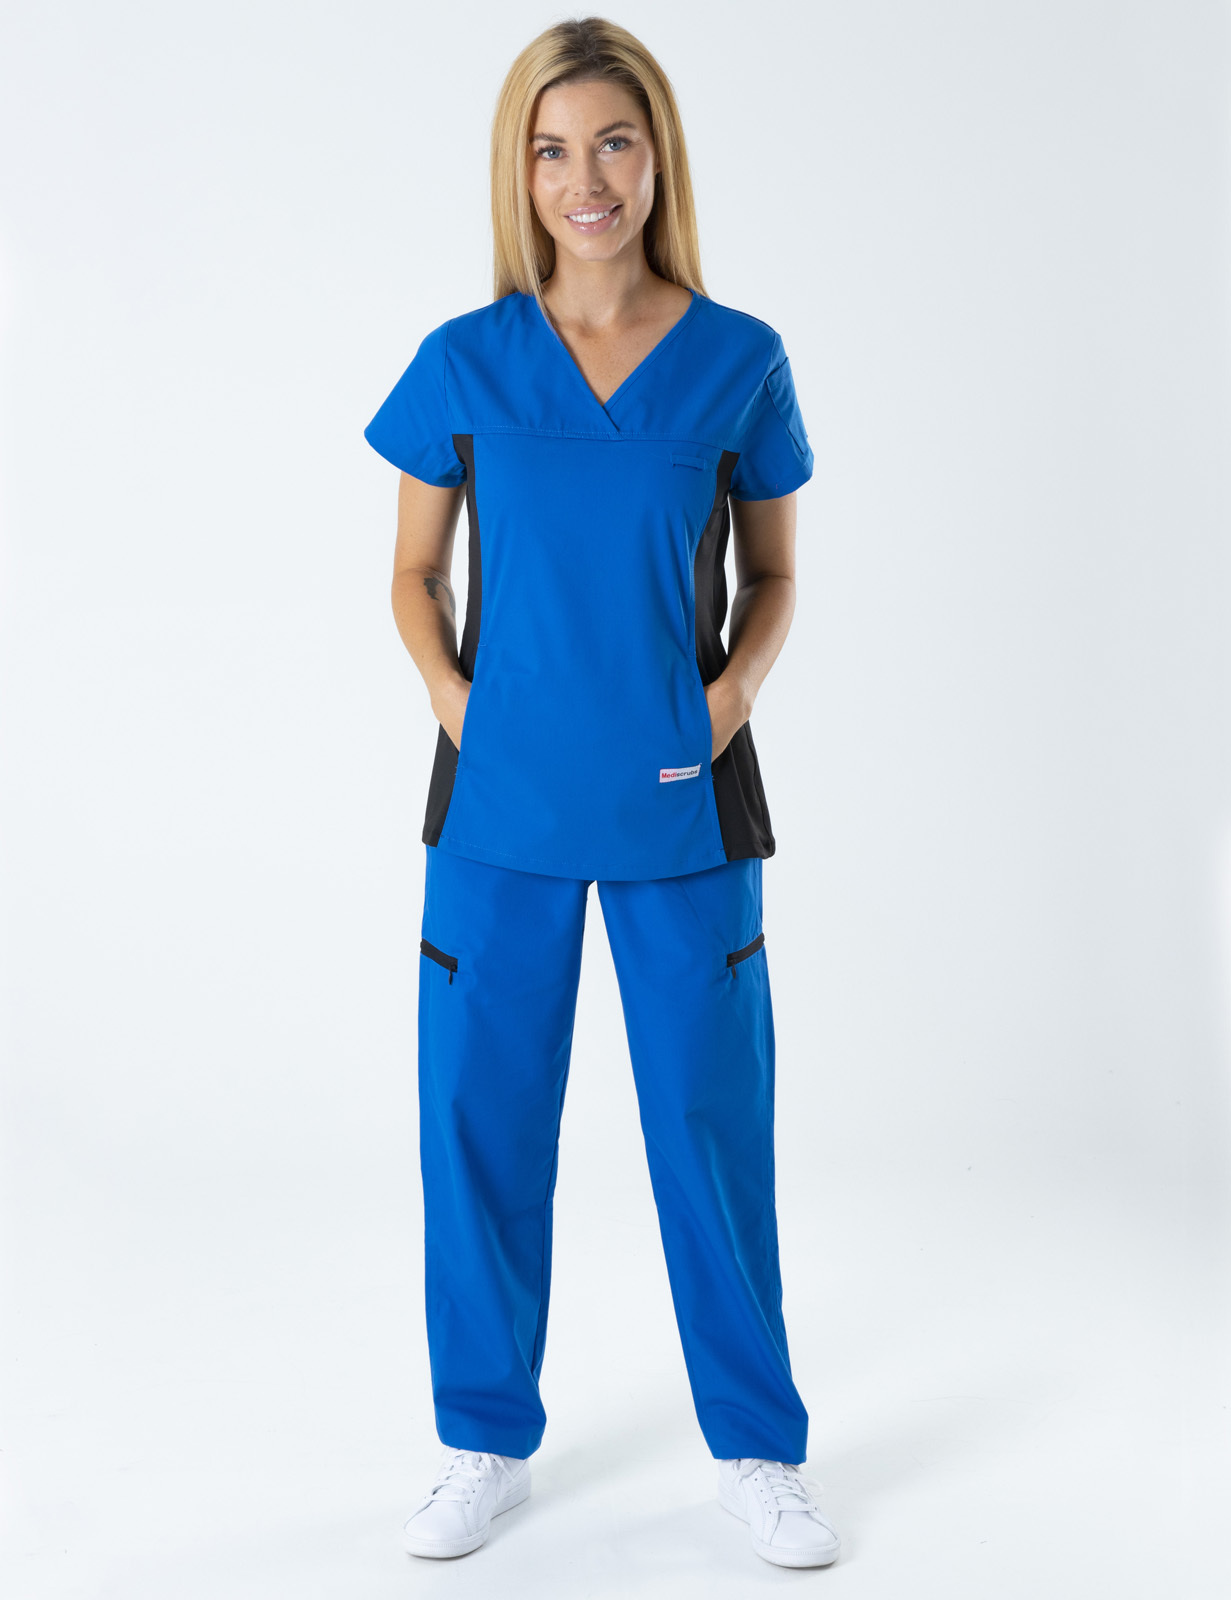 Capricorn Coast Hospital - RN (Women's Fit Spandex Scrub Top and Cargo Pants in Royal incl Logos)